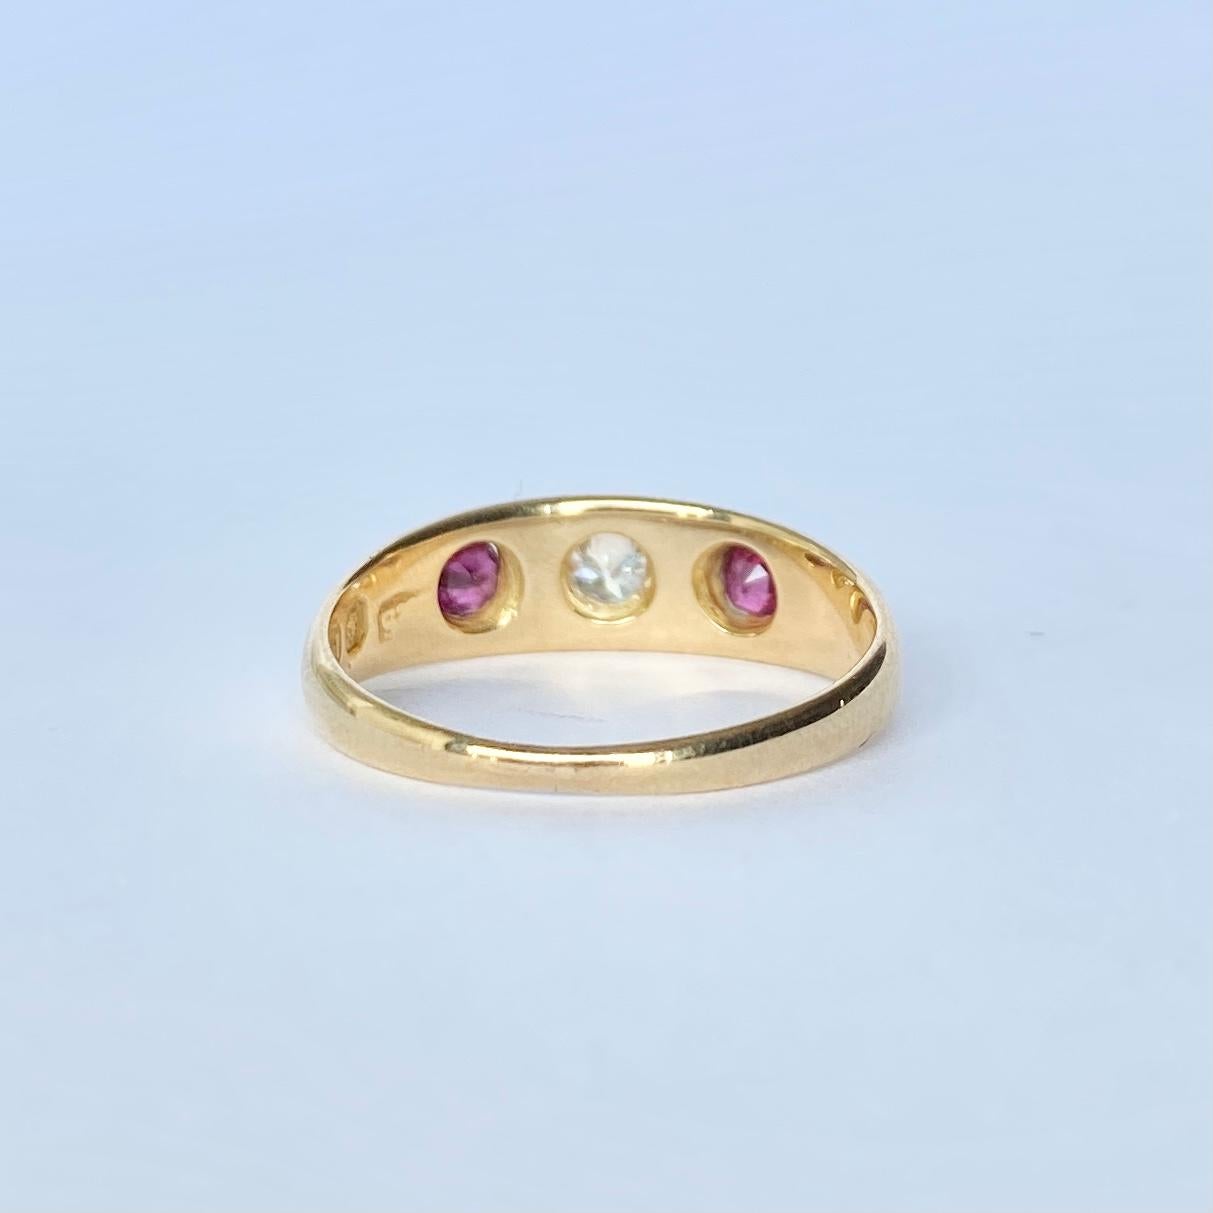 The central diamond in this glossy 18ct gold band measures 15pts and is set in a star setting. The rubies that sit either side of this stone measure 10pts and are held in flush claw settings. Fully hallmarked Chester 1890.

Ring Size: M 1/2 or 6 1/2